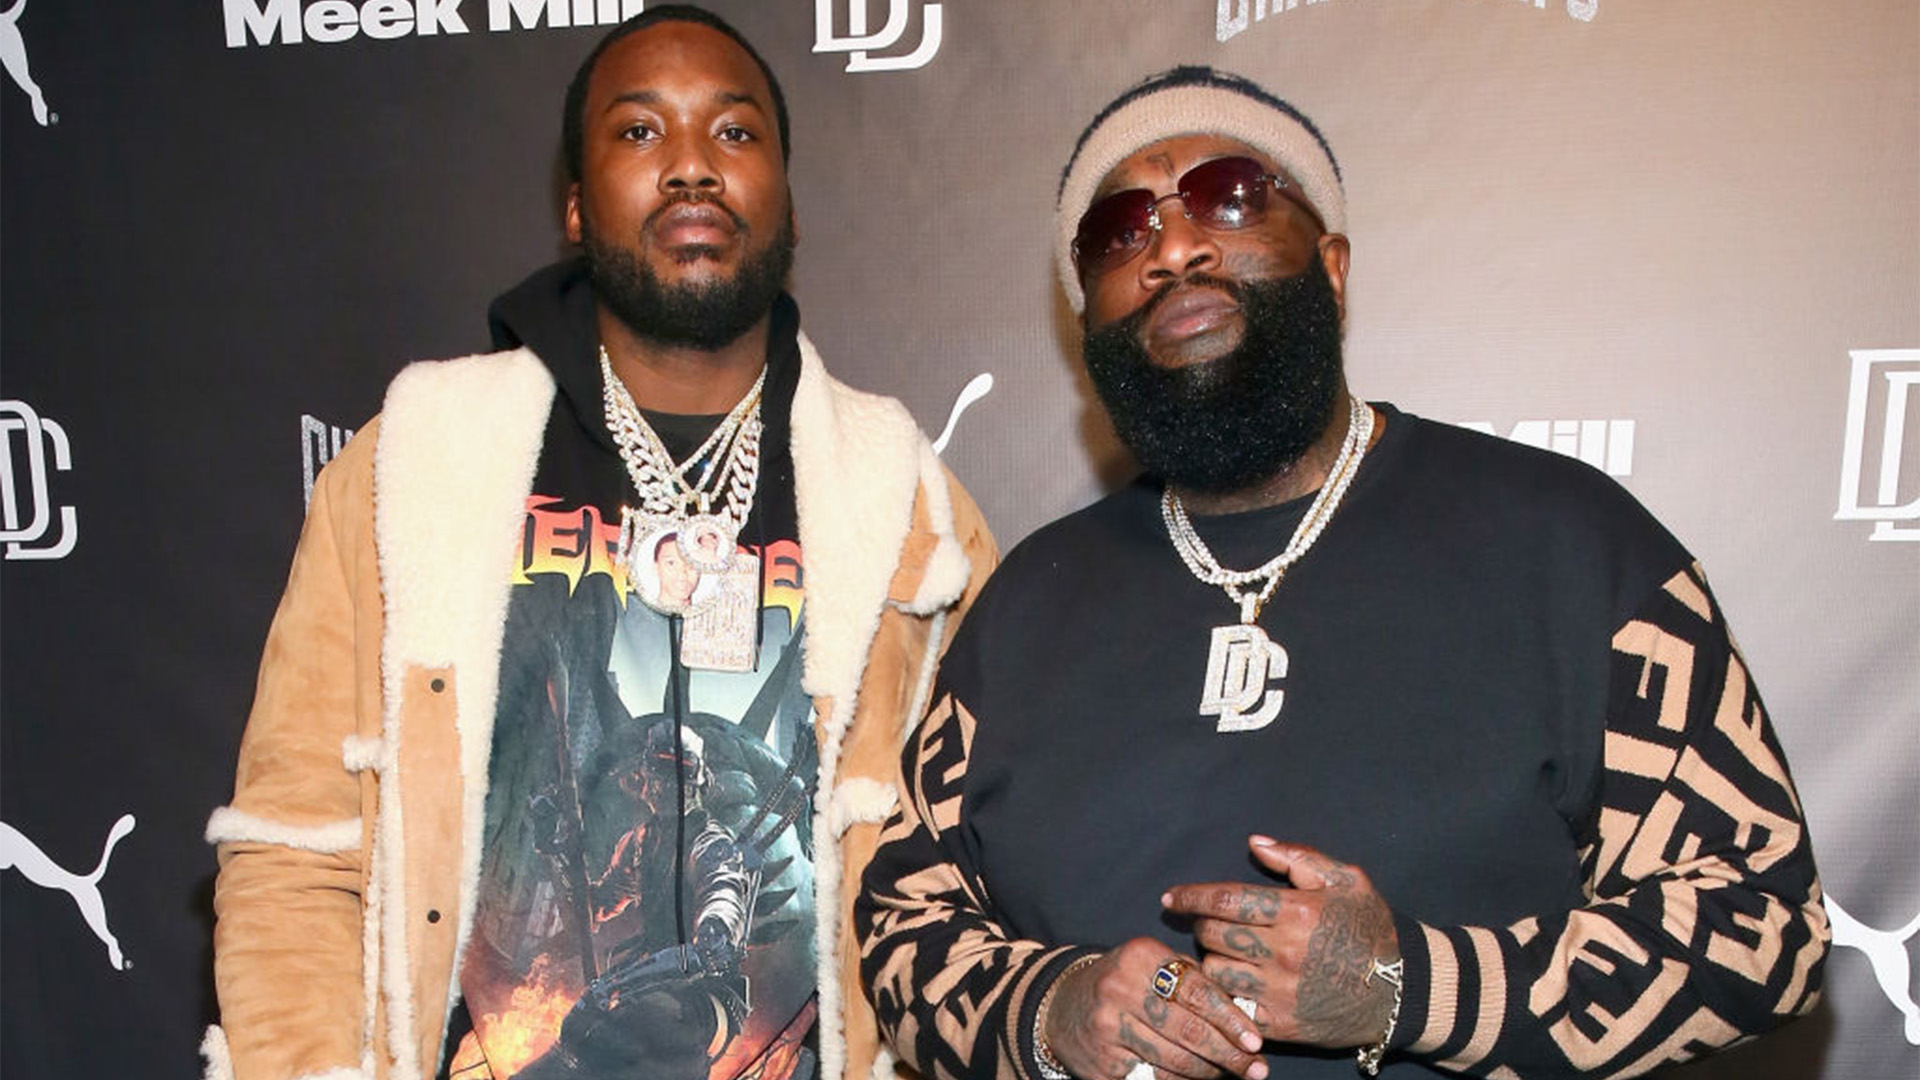 Rick Ross Surprises Meek Mill By Buying His Atlanta Home That Was On The Market For Over 2 Years